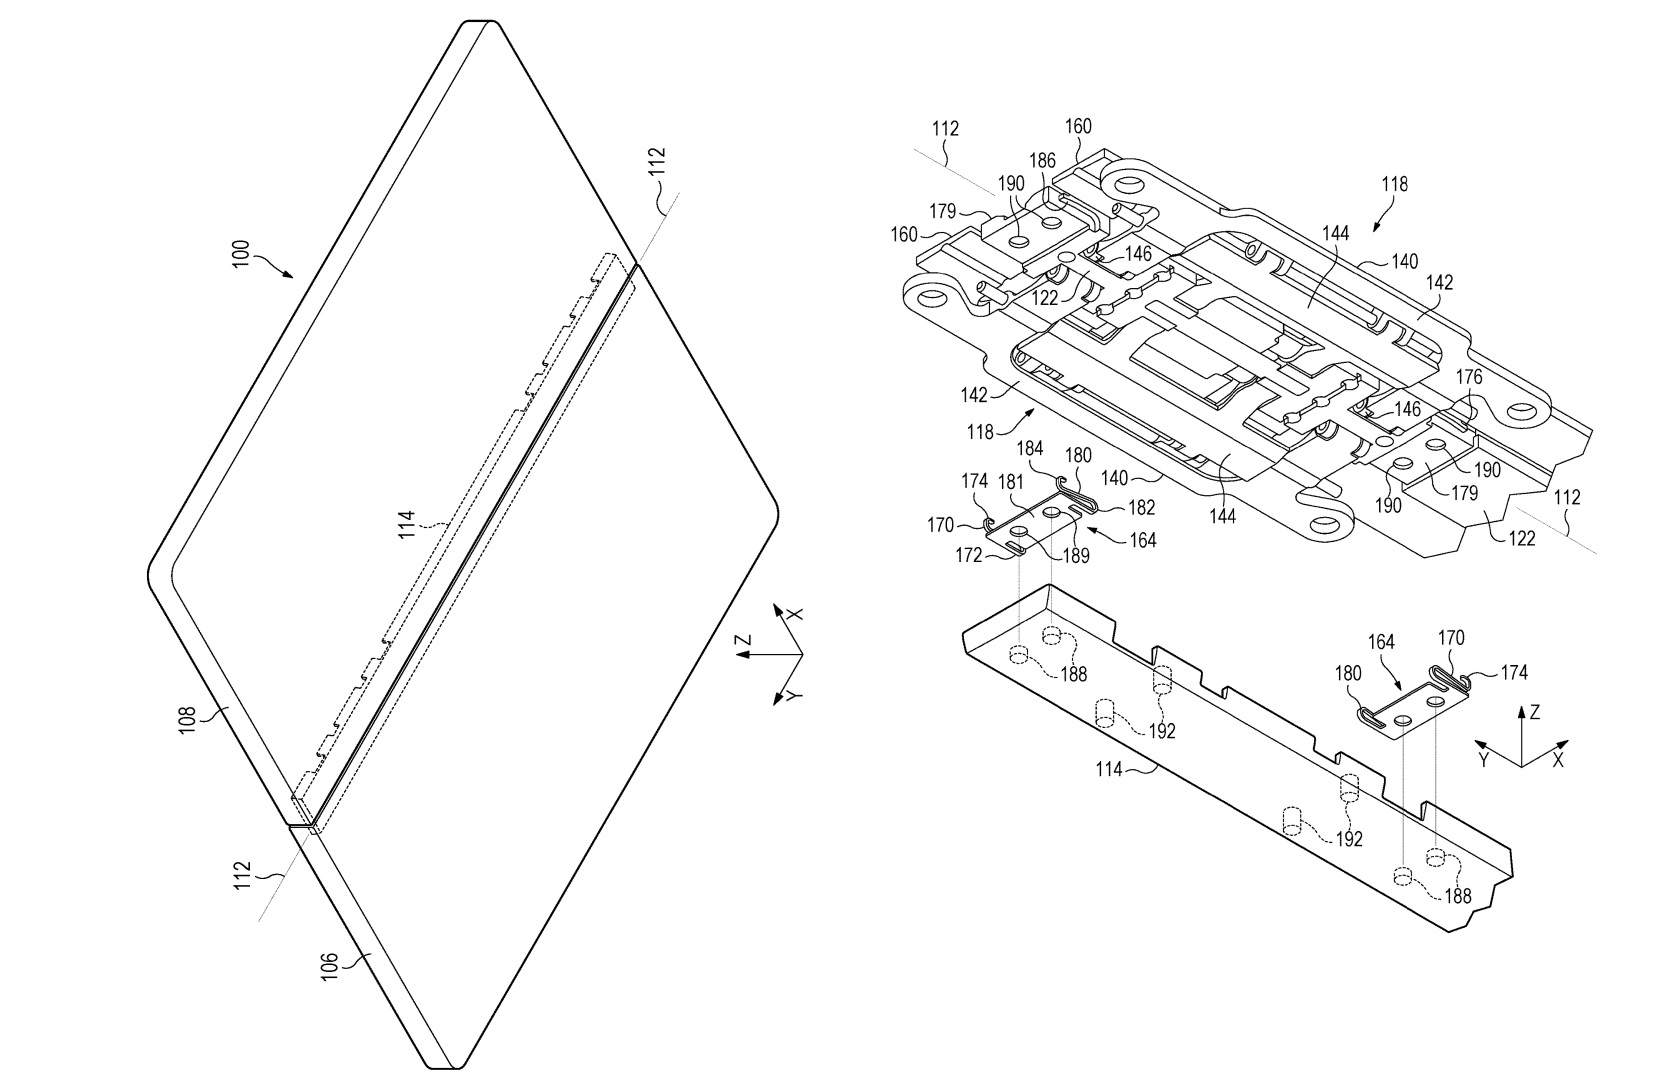 Surface Phone patent with single plate cover